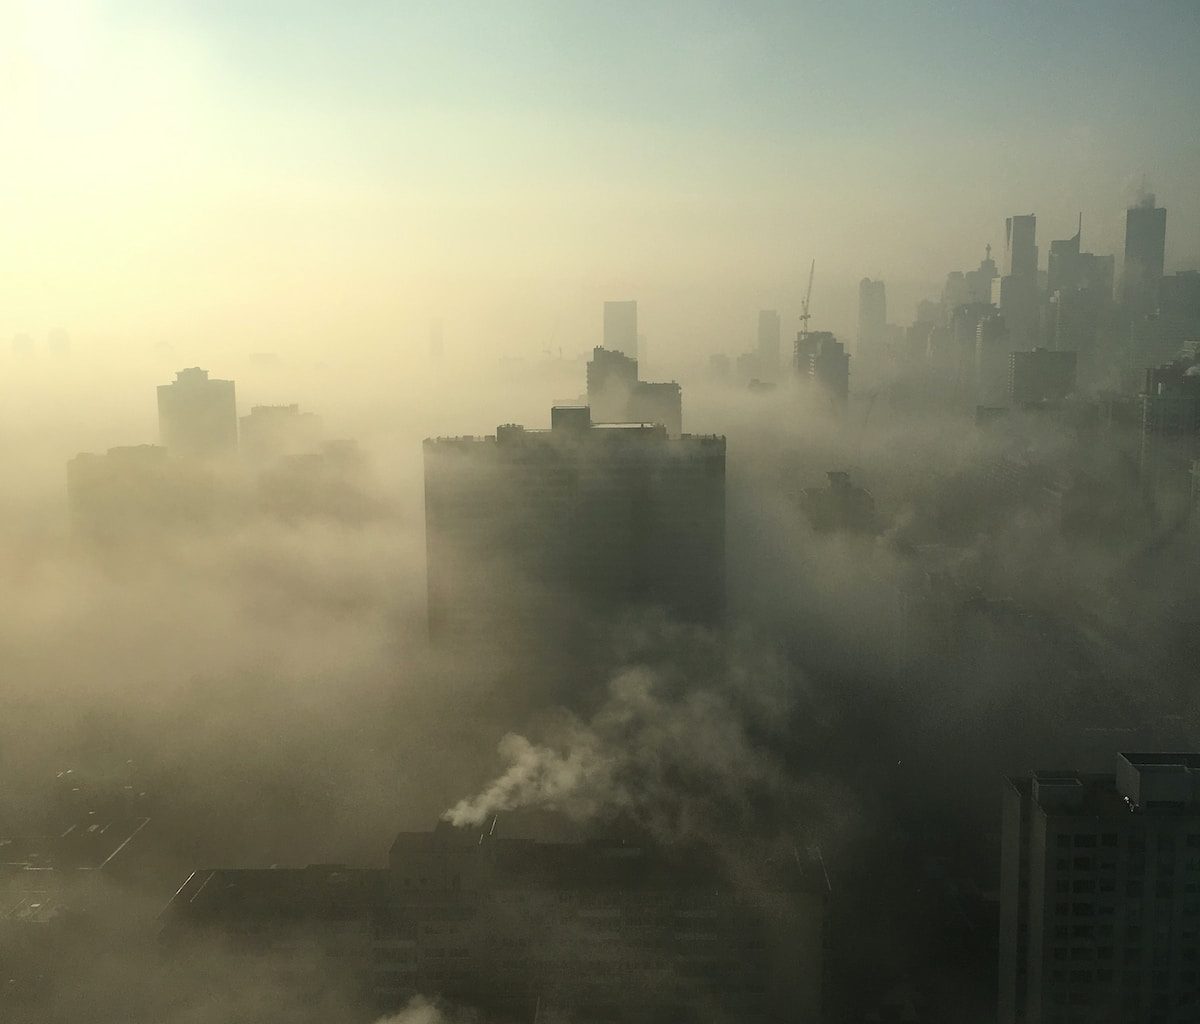 city with high-rise building covered with fogs